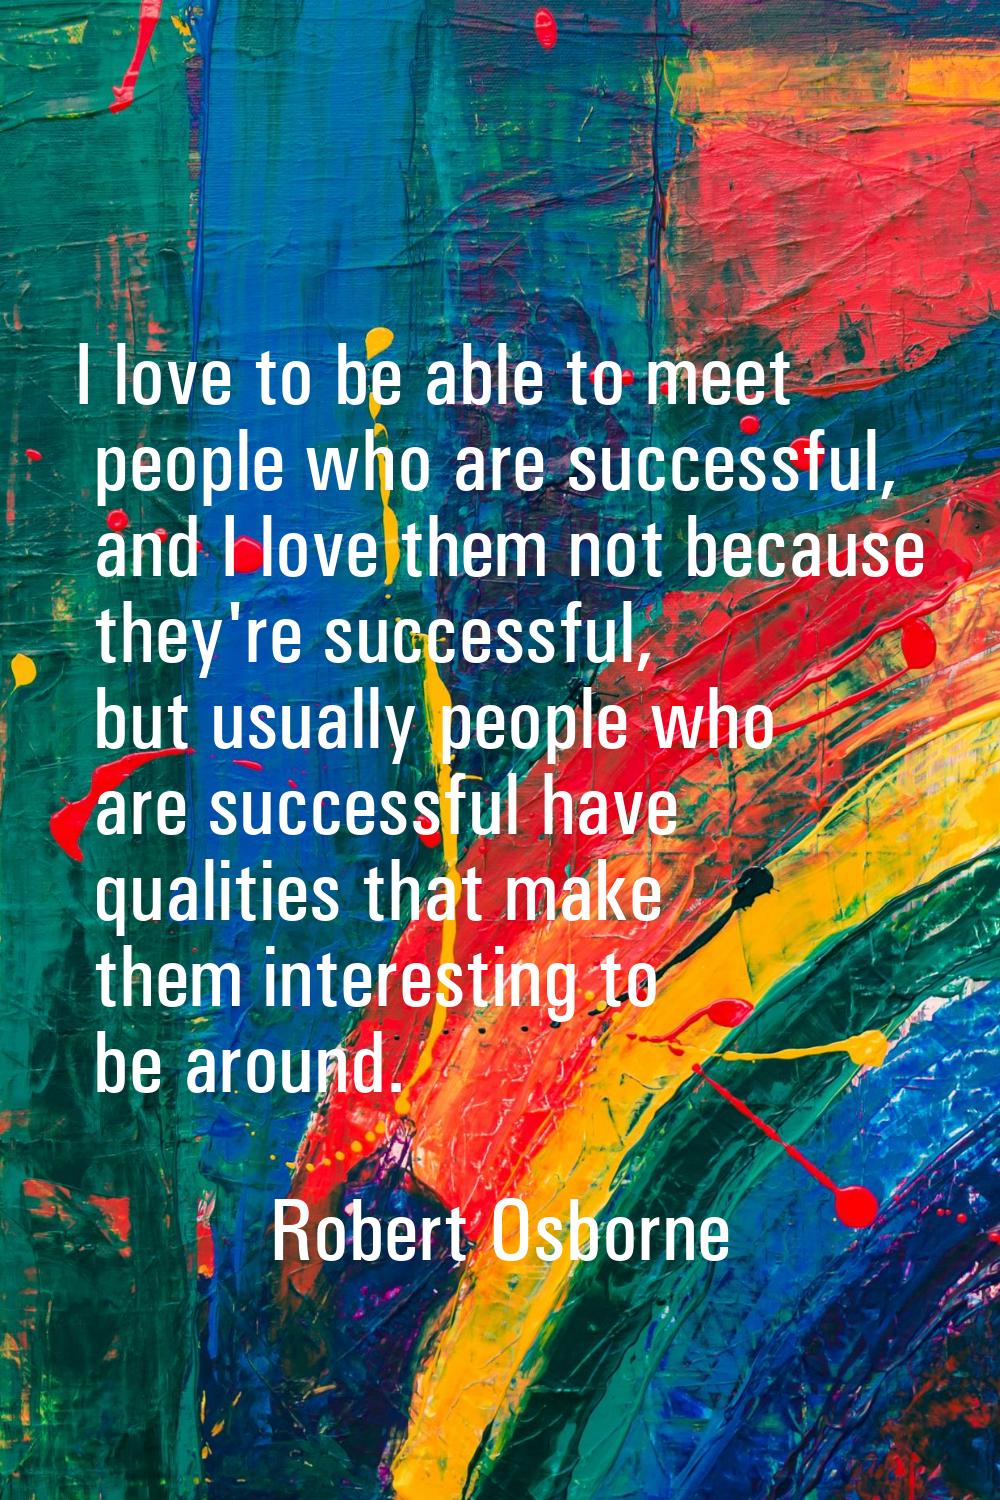 I love to be able to meet people who are successful, and I love them not because they're successful